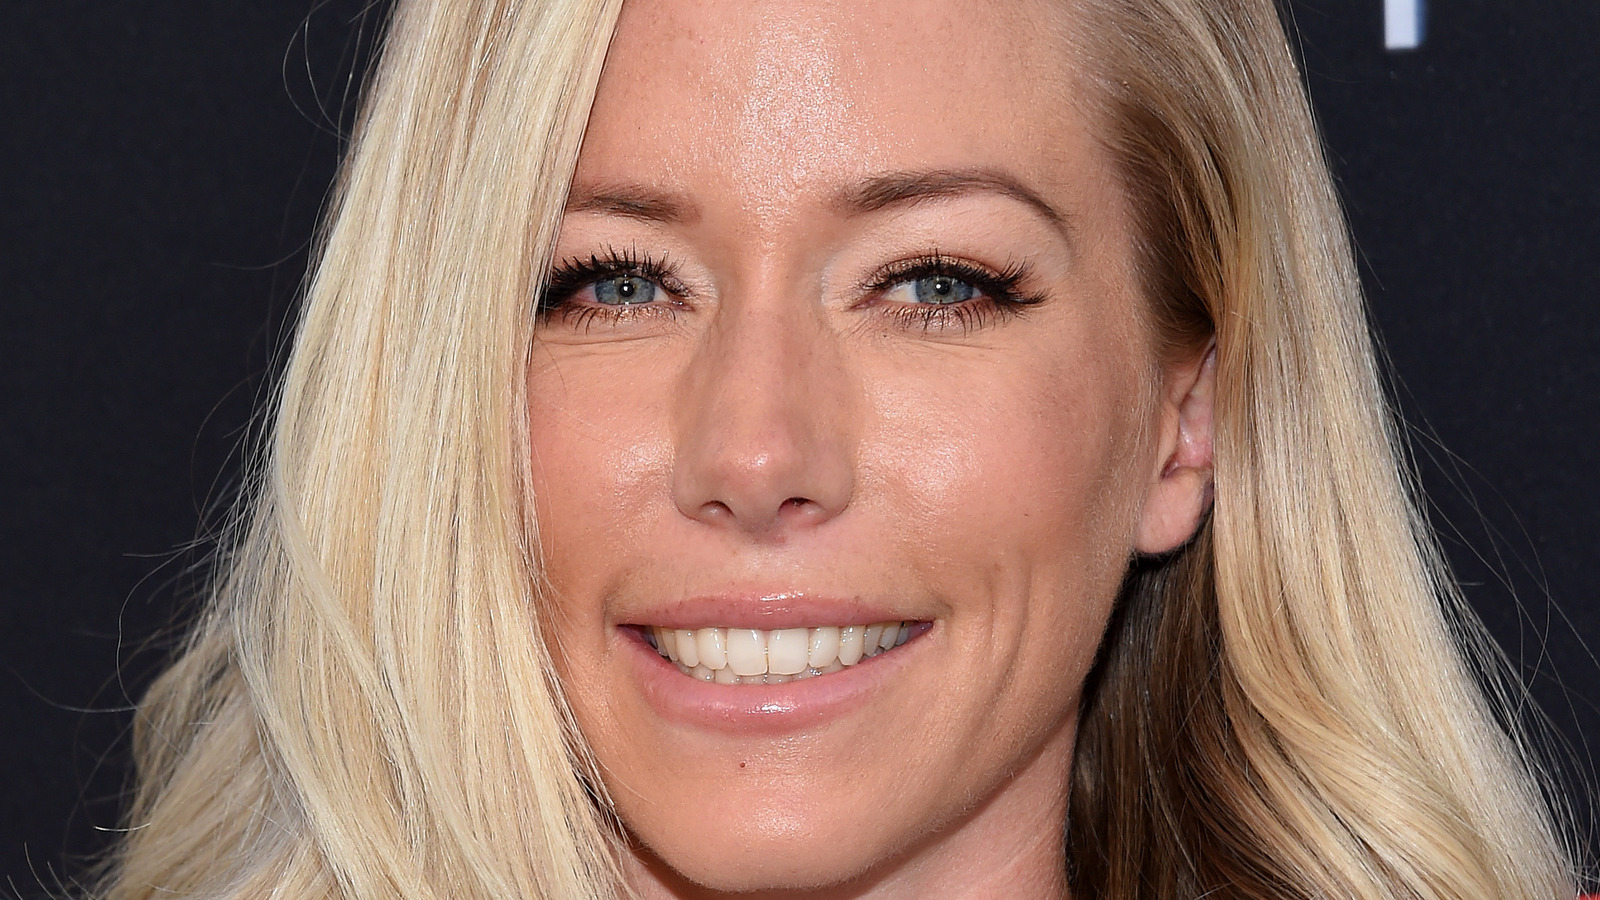 Is Kendra Wilkinson An Actual Real Estate Agent?